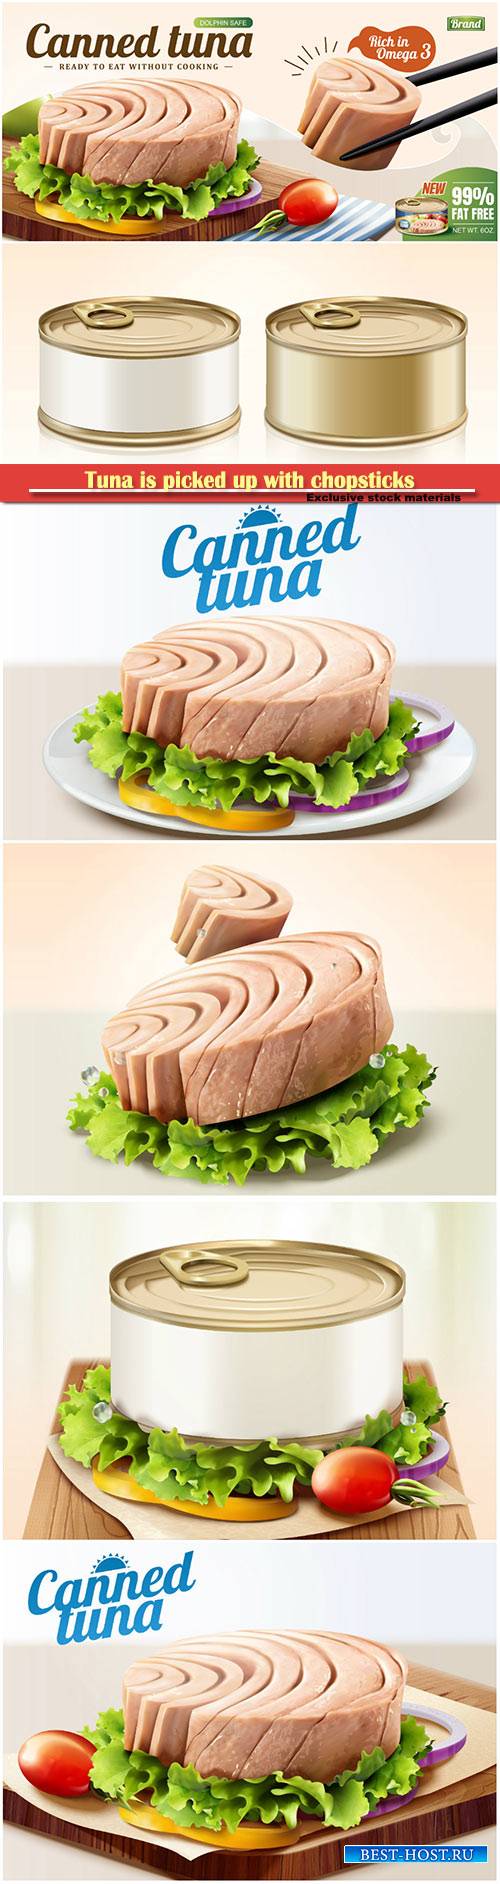 Tuna is picked up with chopsticks in 3d illustration, canned food ads